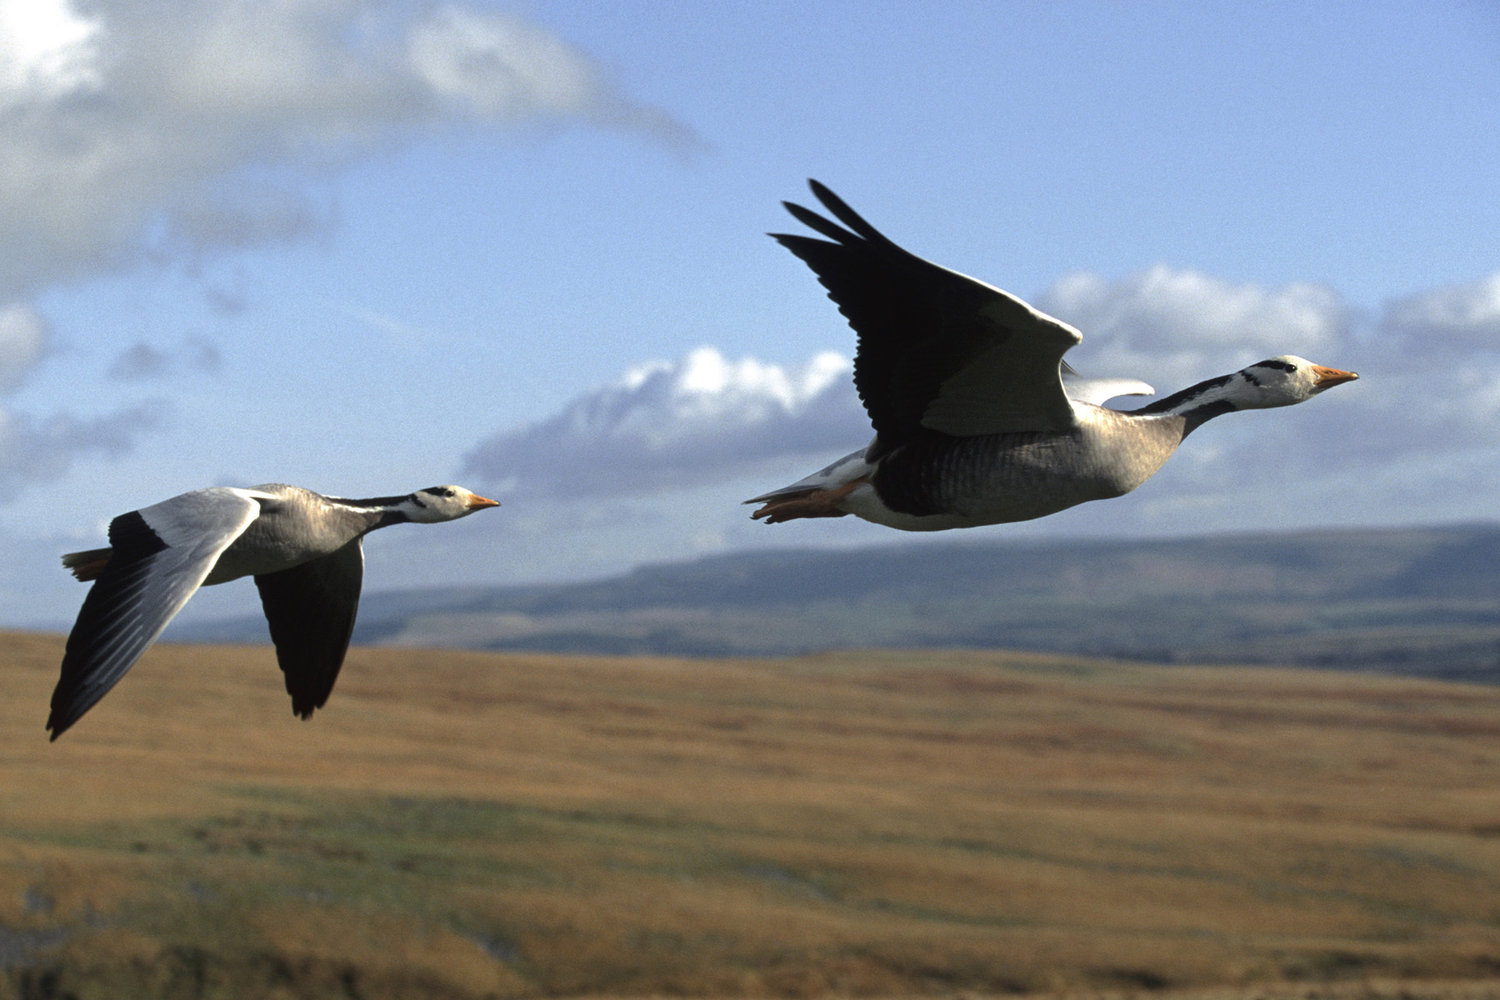 Image of bar headed geese in flight from John Downer/Nature Picture Library/Corbis